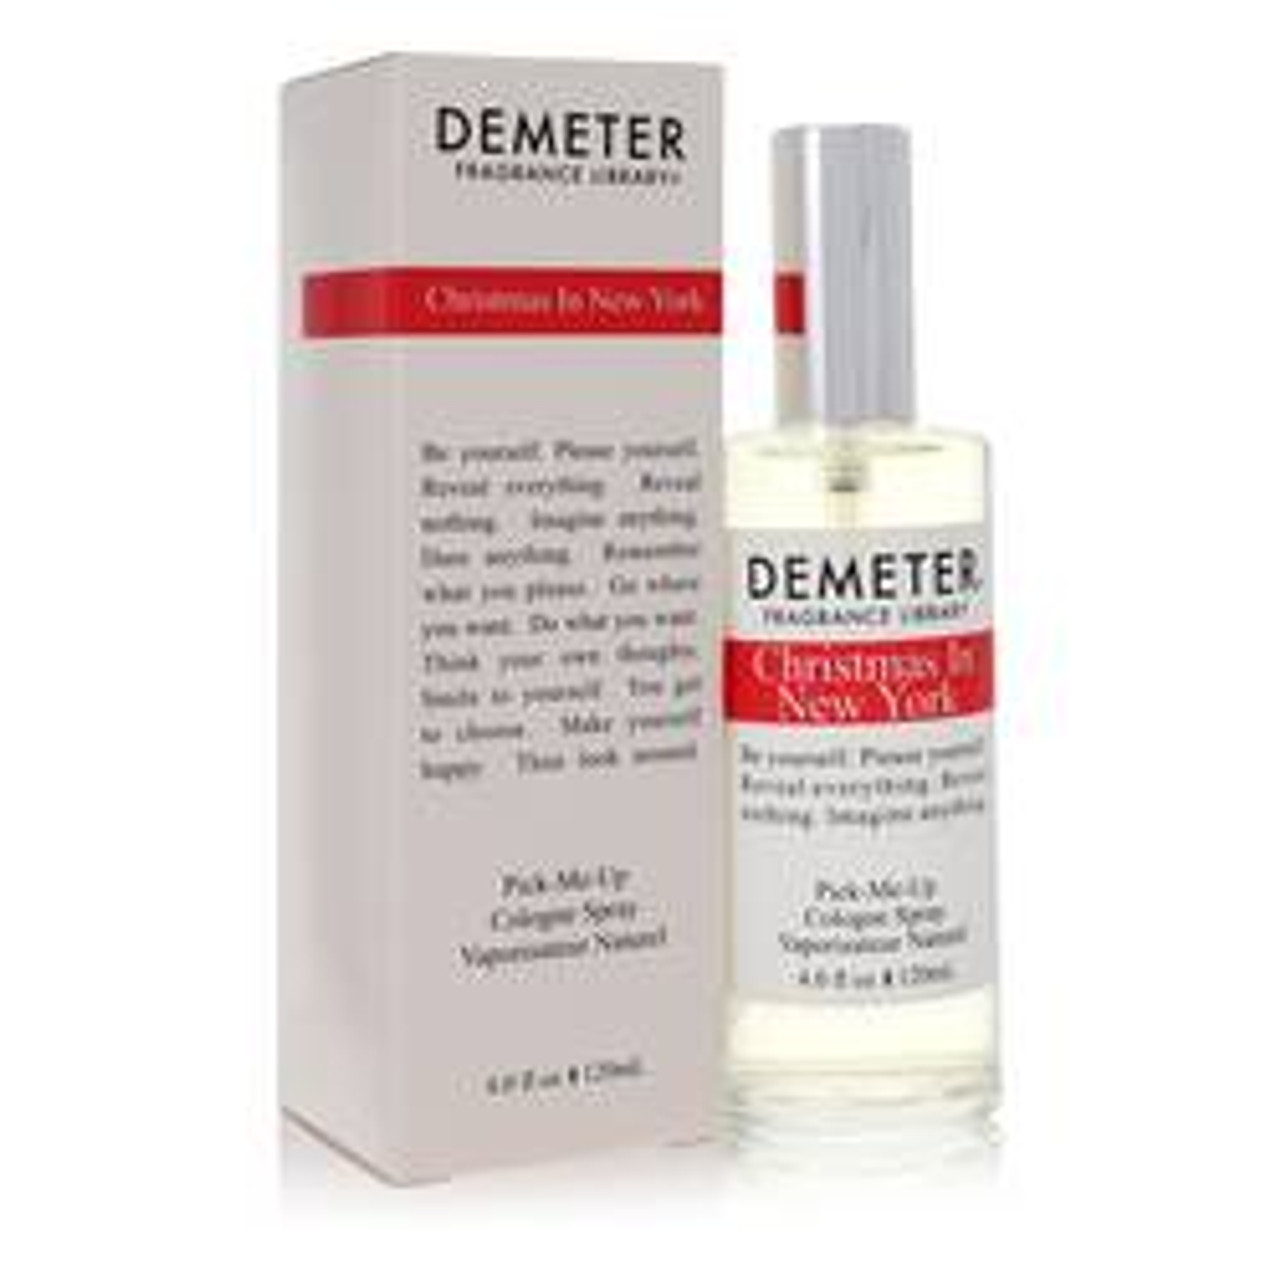 Demeter Christmas In New York Perfume By Demeter Cologne Spray 4 oz for Women - [From 79.50 - Choose pk Qty ] - *Ships from Miami